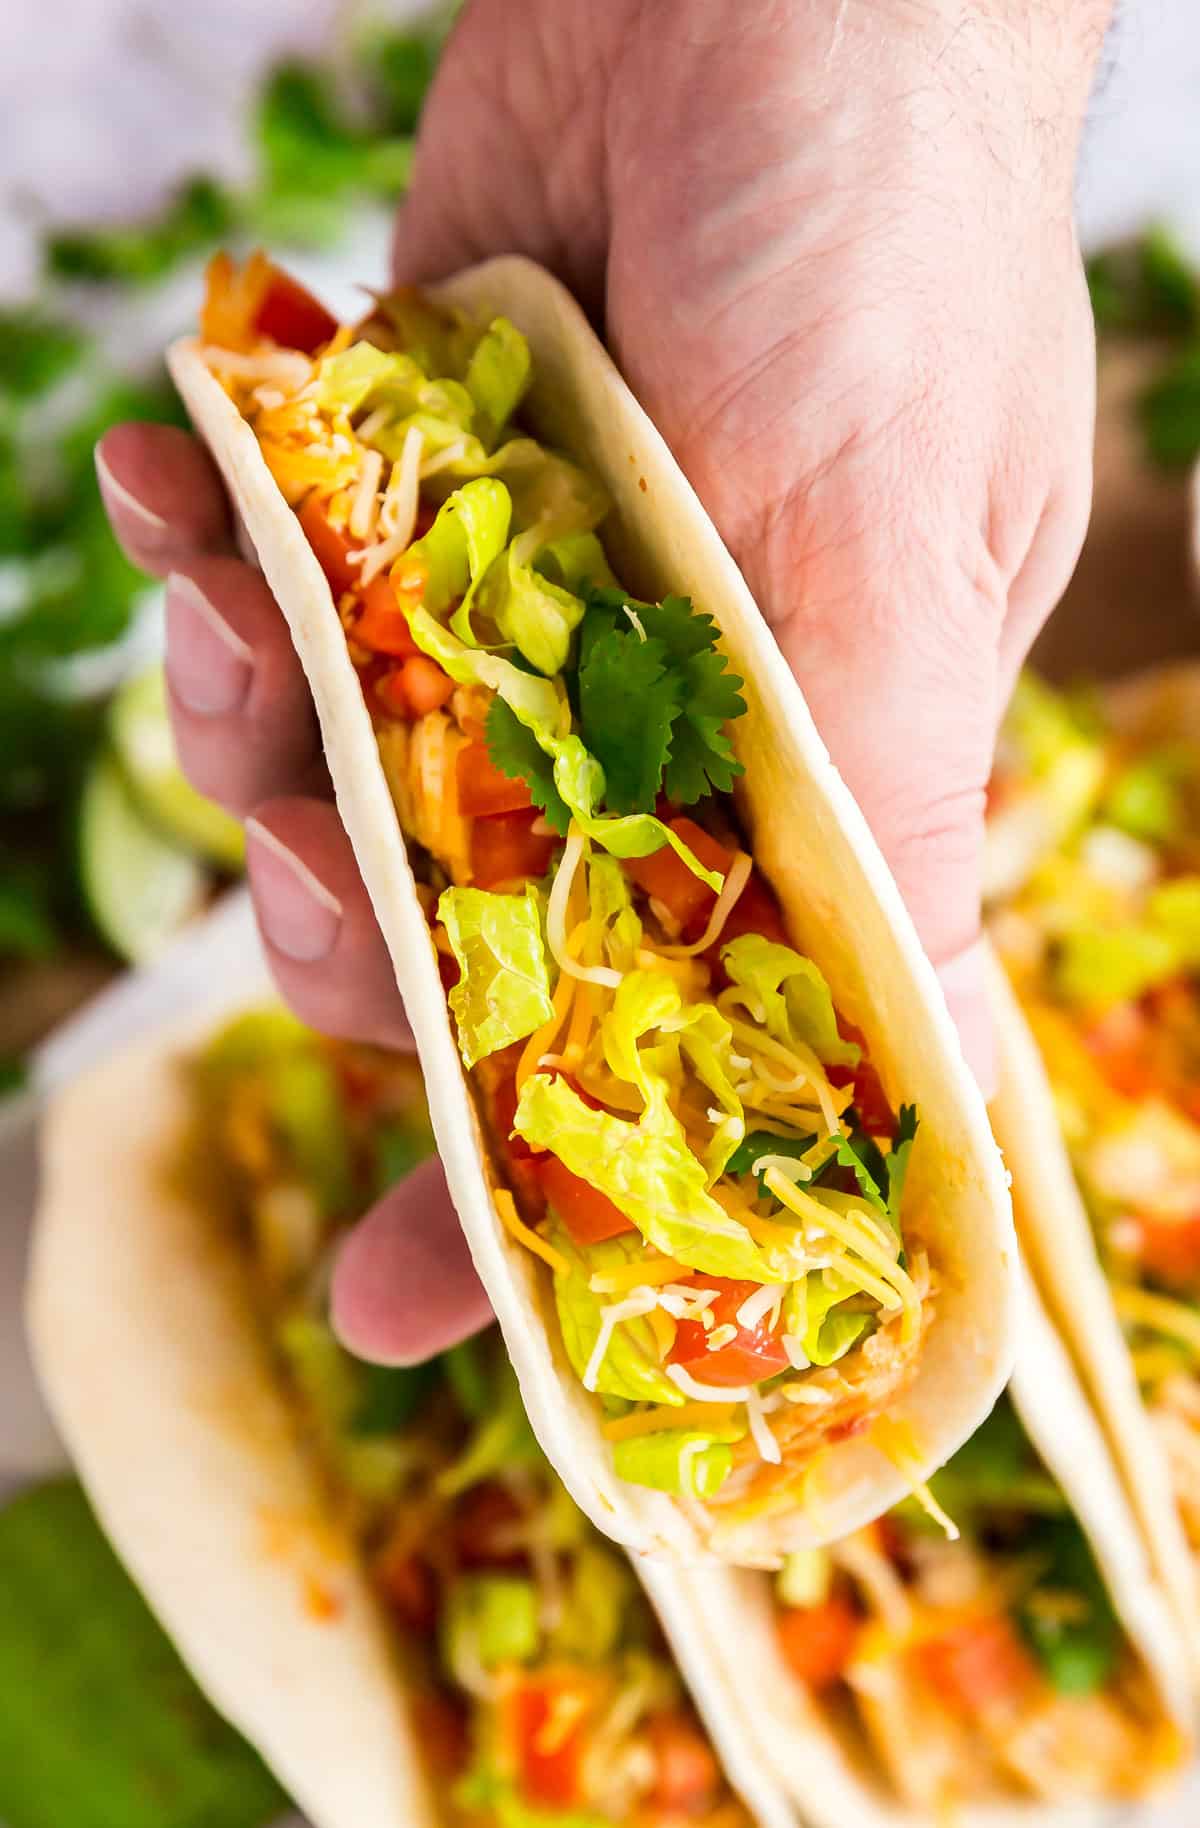 A hand holding a taco with chicken, lettuce, tomatoes and cheese.